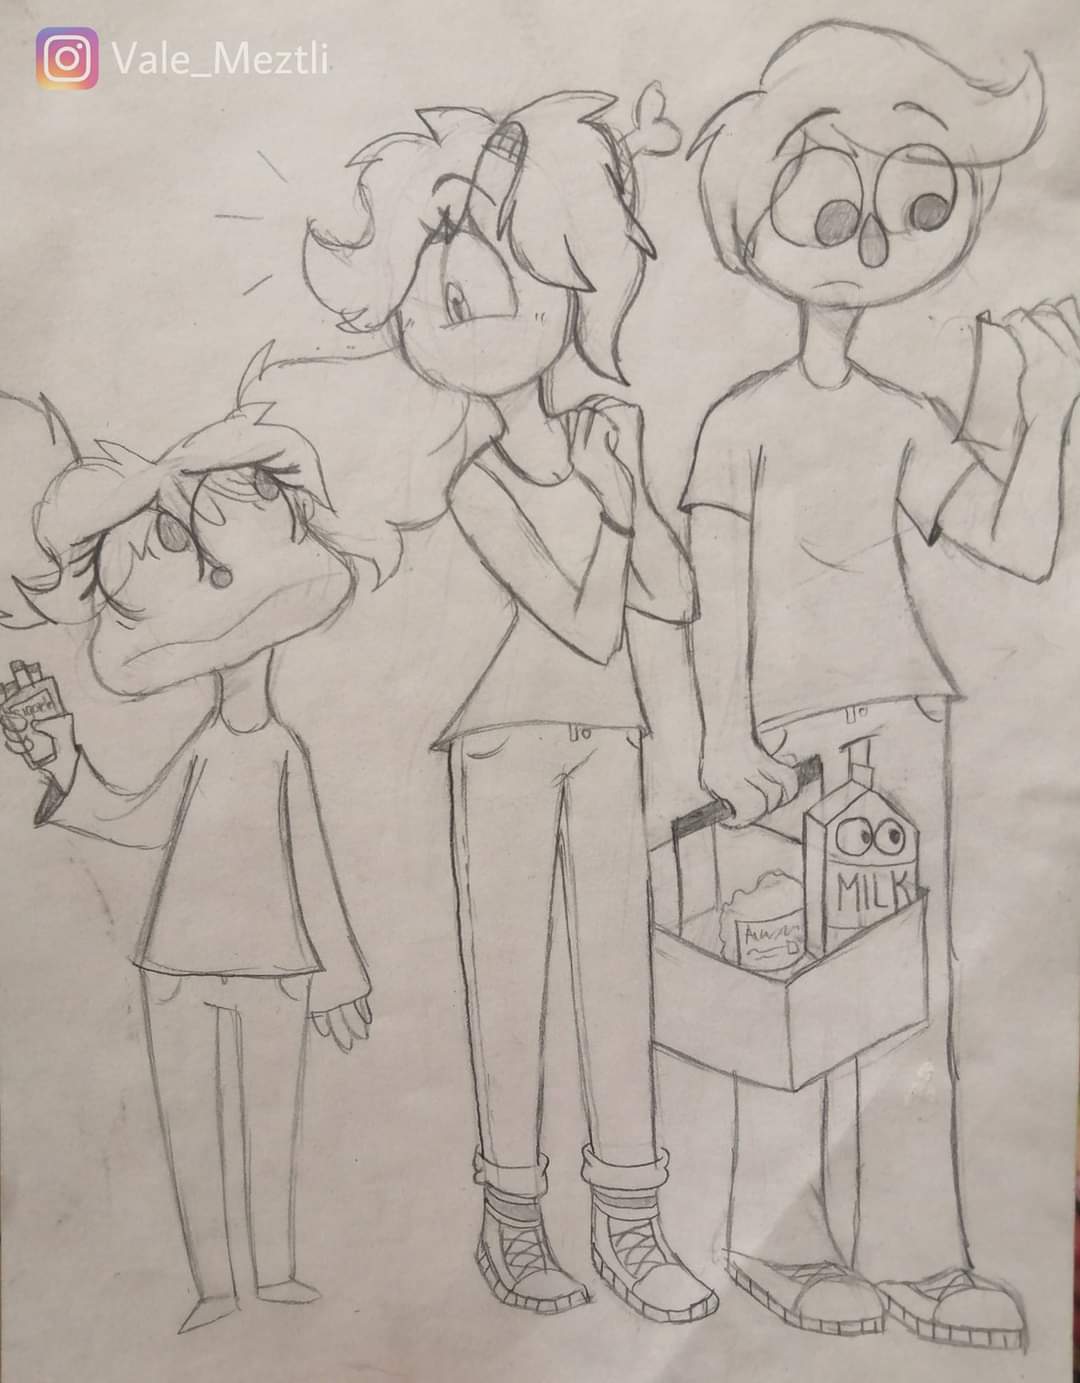 Δ×°•!Vǟℓę¡•°×Δ on Twitter: "I made quick sketch my three favorite characters from #jackstauber, cause they are Opal (Claire), Hamantha and the guy who appears in "Shop, a Pop